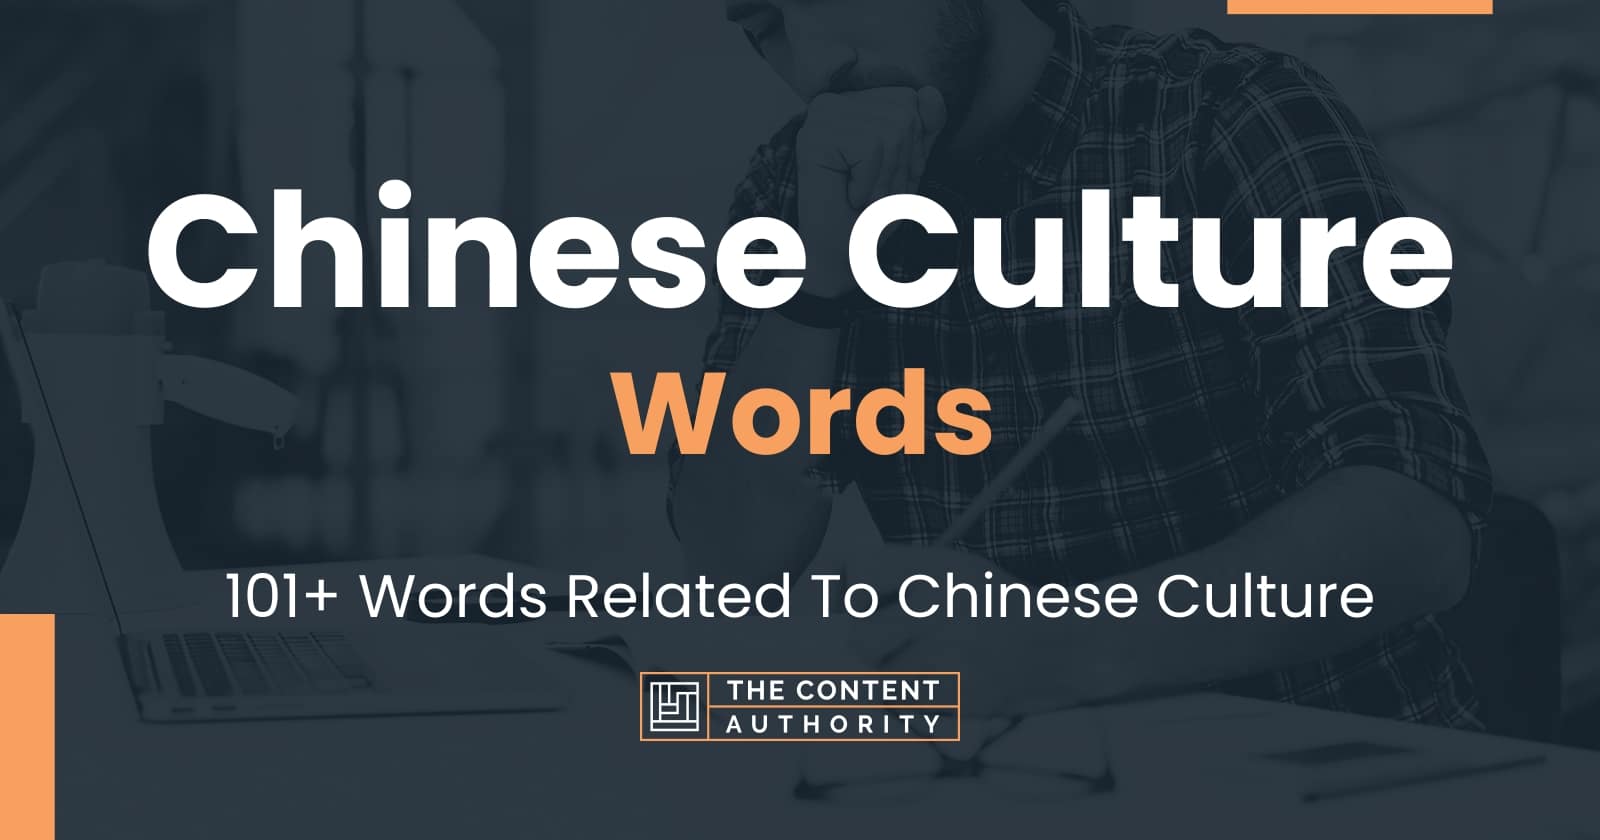 Chinese Culture Words - 101+ Words Related To Chinese Culture